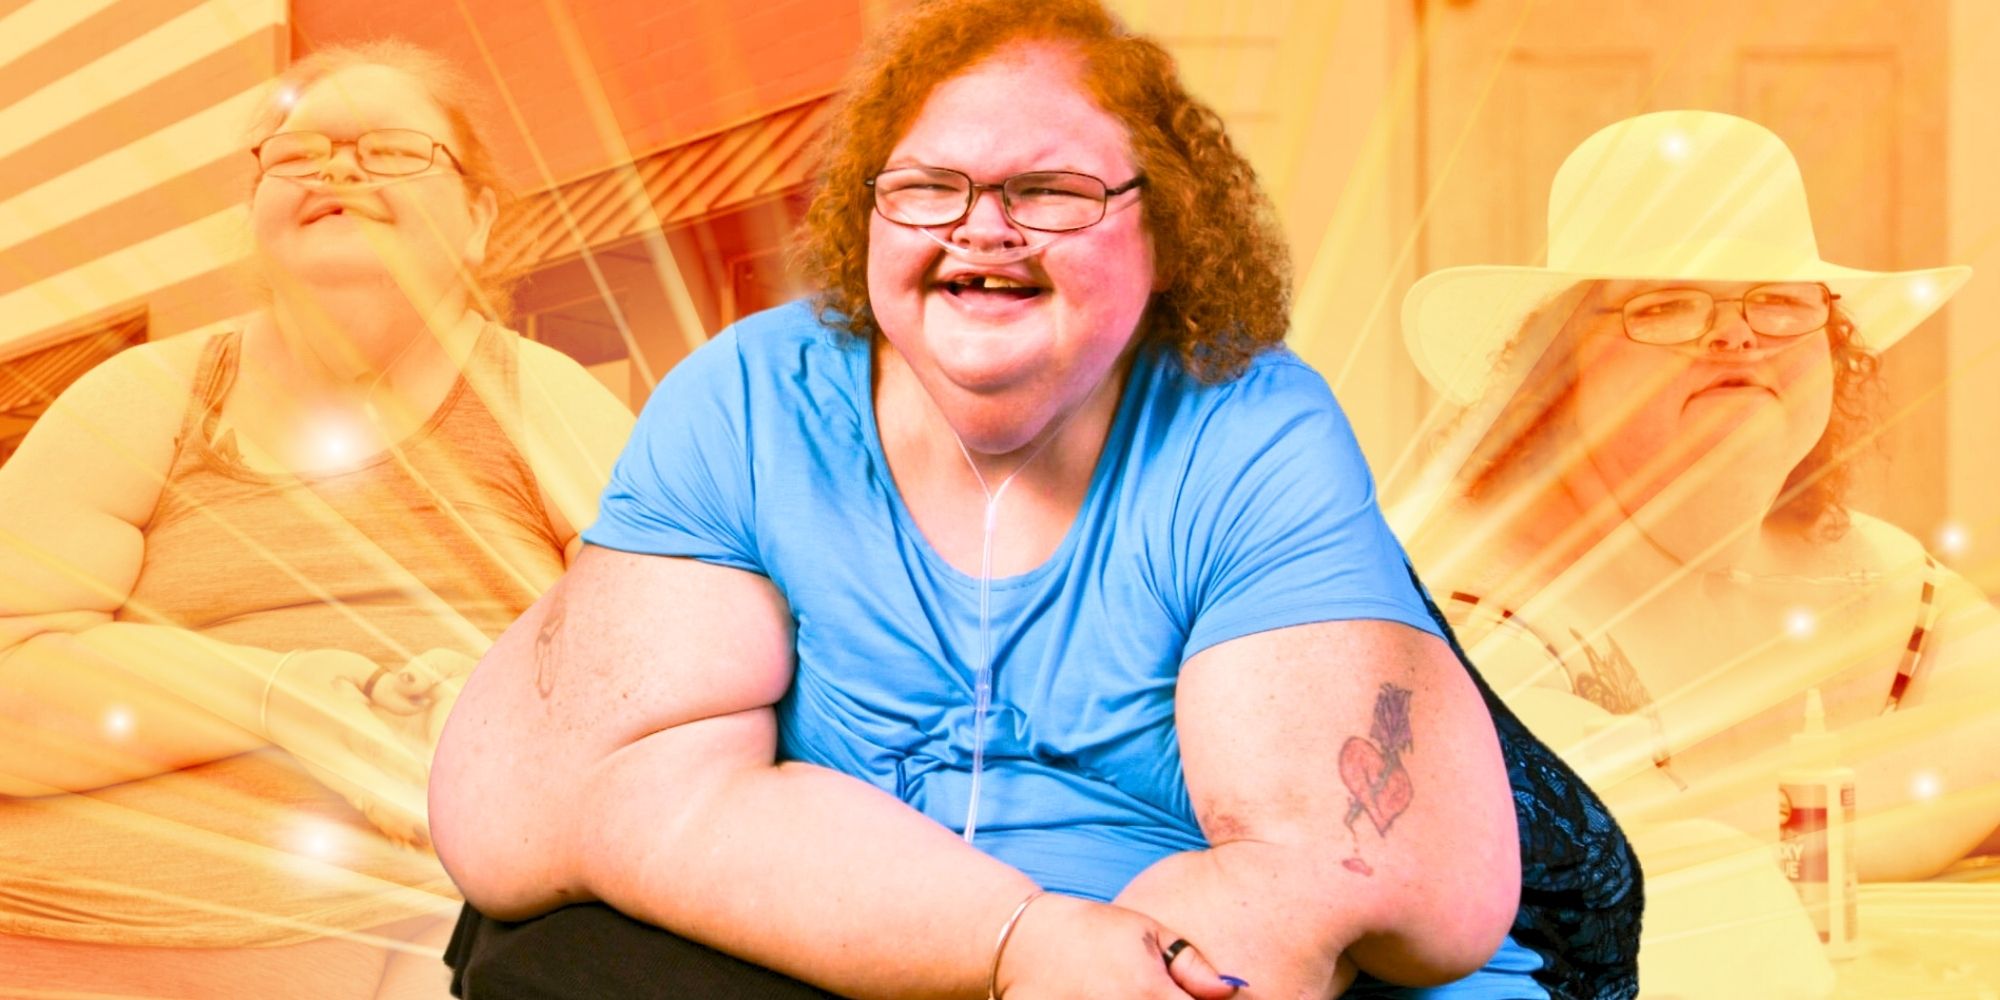 Montage of 1000-Lb Sisters' Tammy Slaton smiling with rays of sunshine